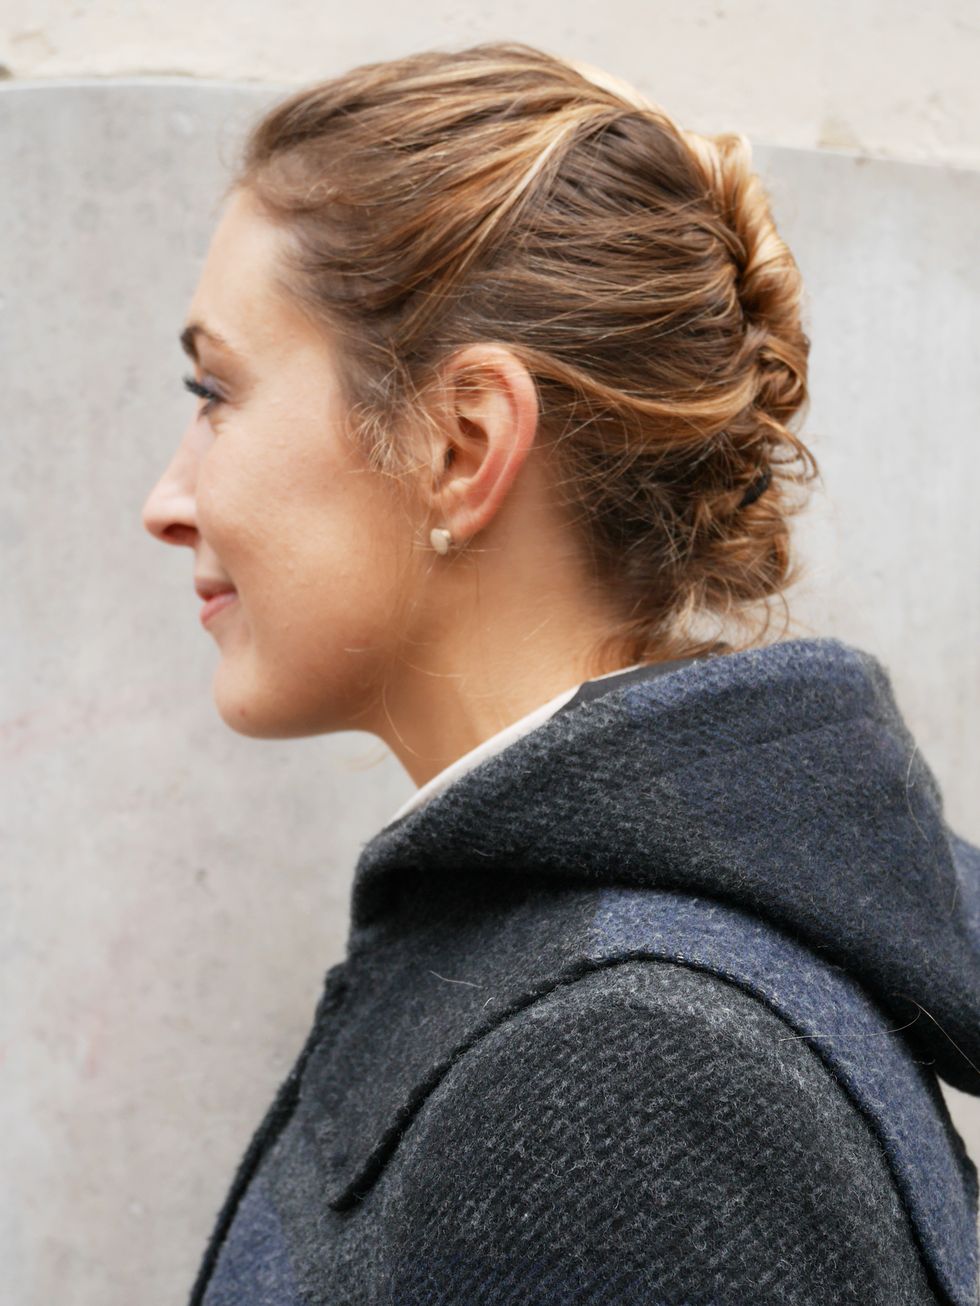 Ear, Hairstyle, Chin, Forehead, Eyebrow, Style, Street fashion, Temple, Neck, Brown hair, 